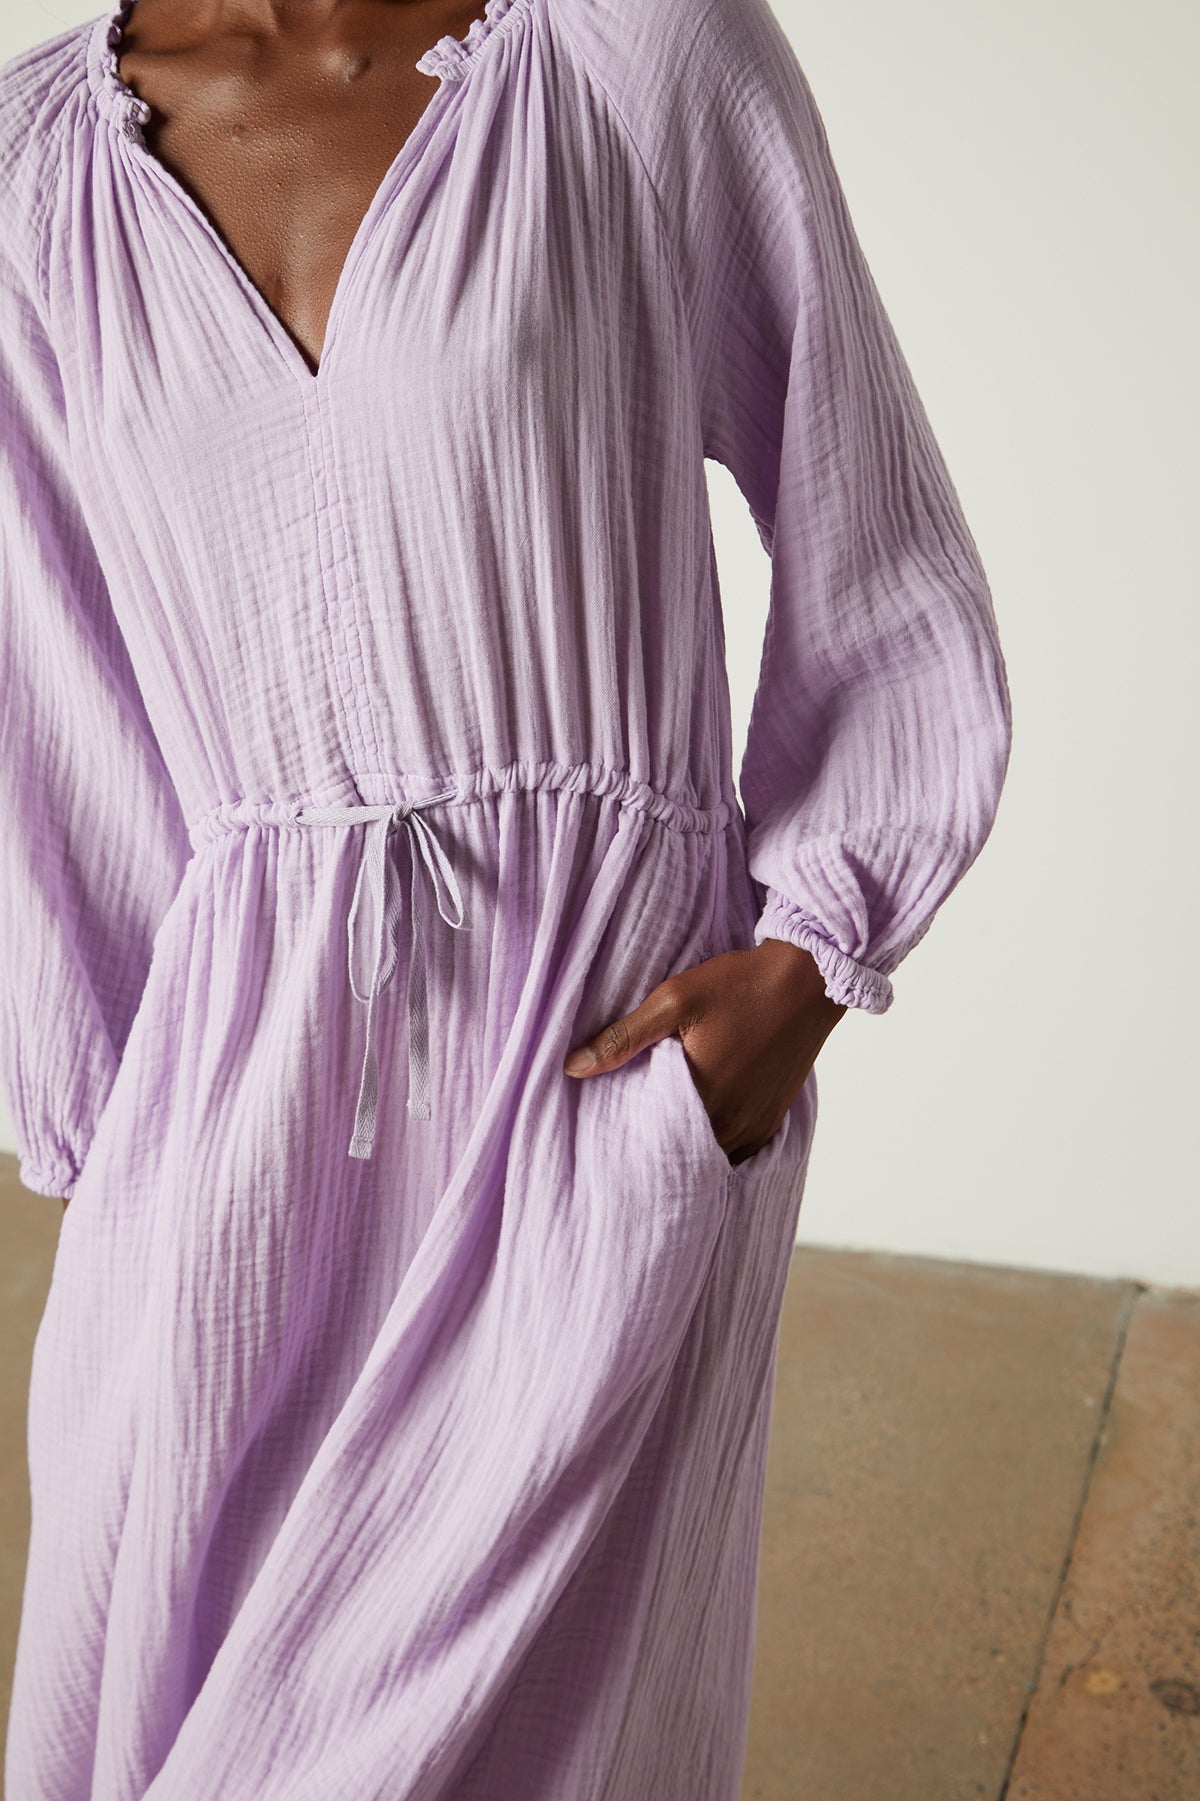   Front detail of Audrey cotton gauze dress in light lavender thistle color with model's hand in pocket 